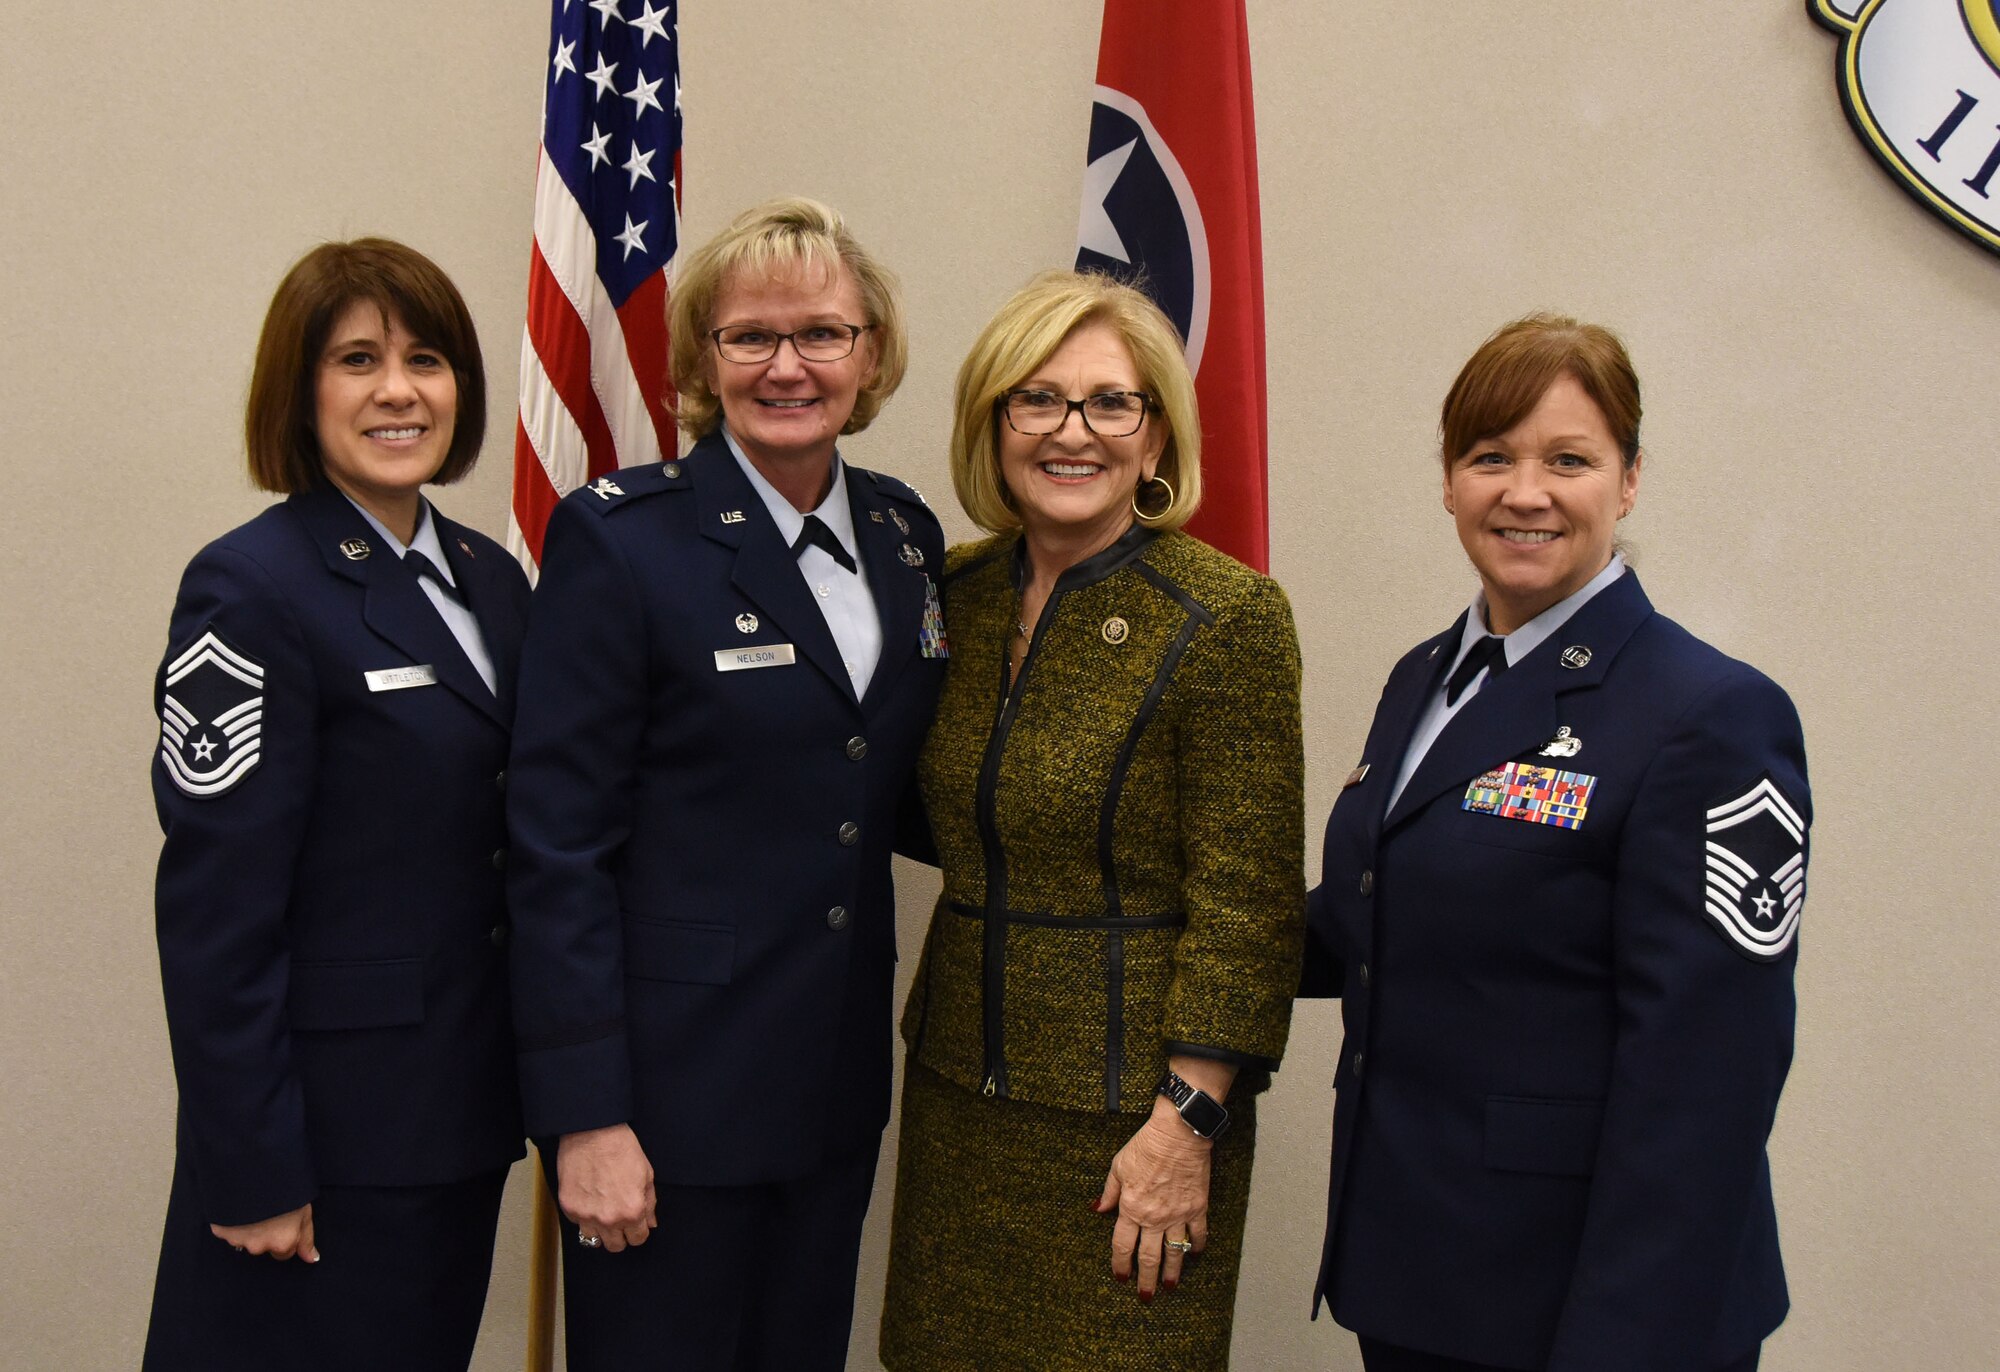 Former U.S. Rep. Diane Black, center, poses with senior female leaders in the 118th Wing March 9, 2019 at Berry Field Air National Guard Base, Nashville, Tennessee.